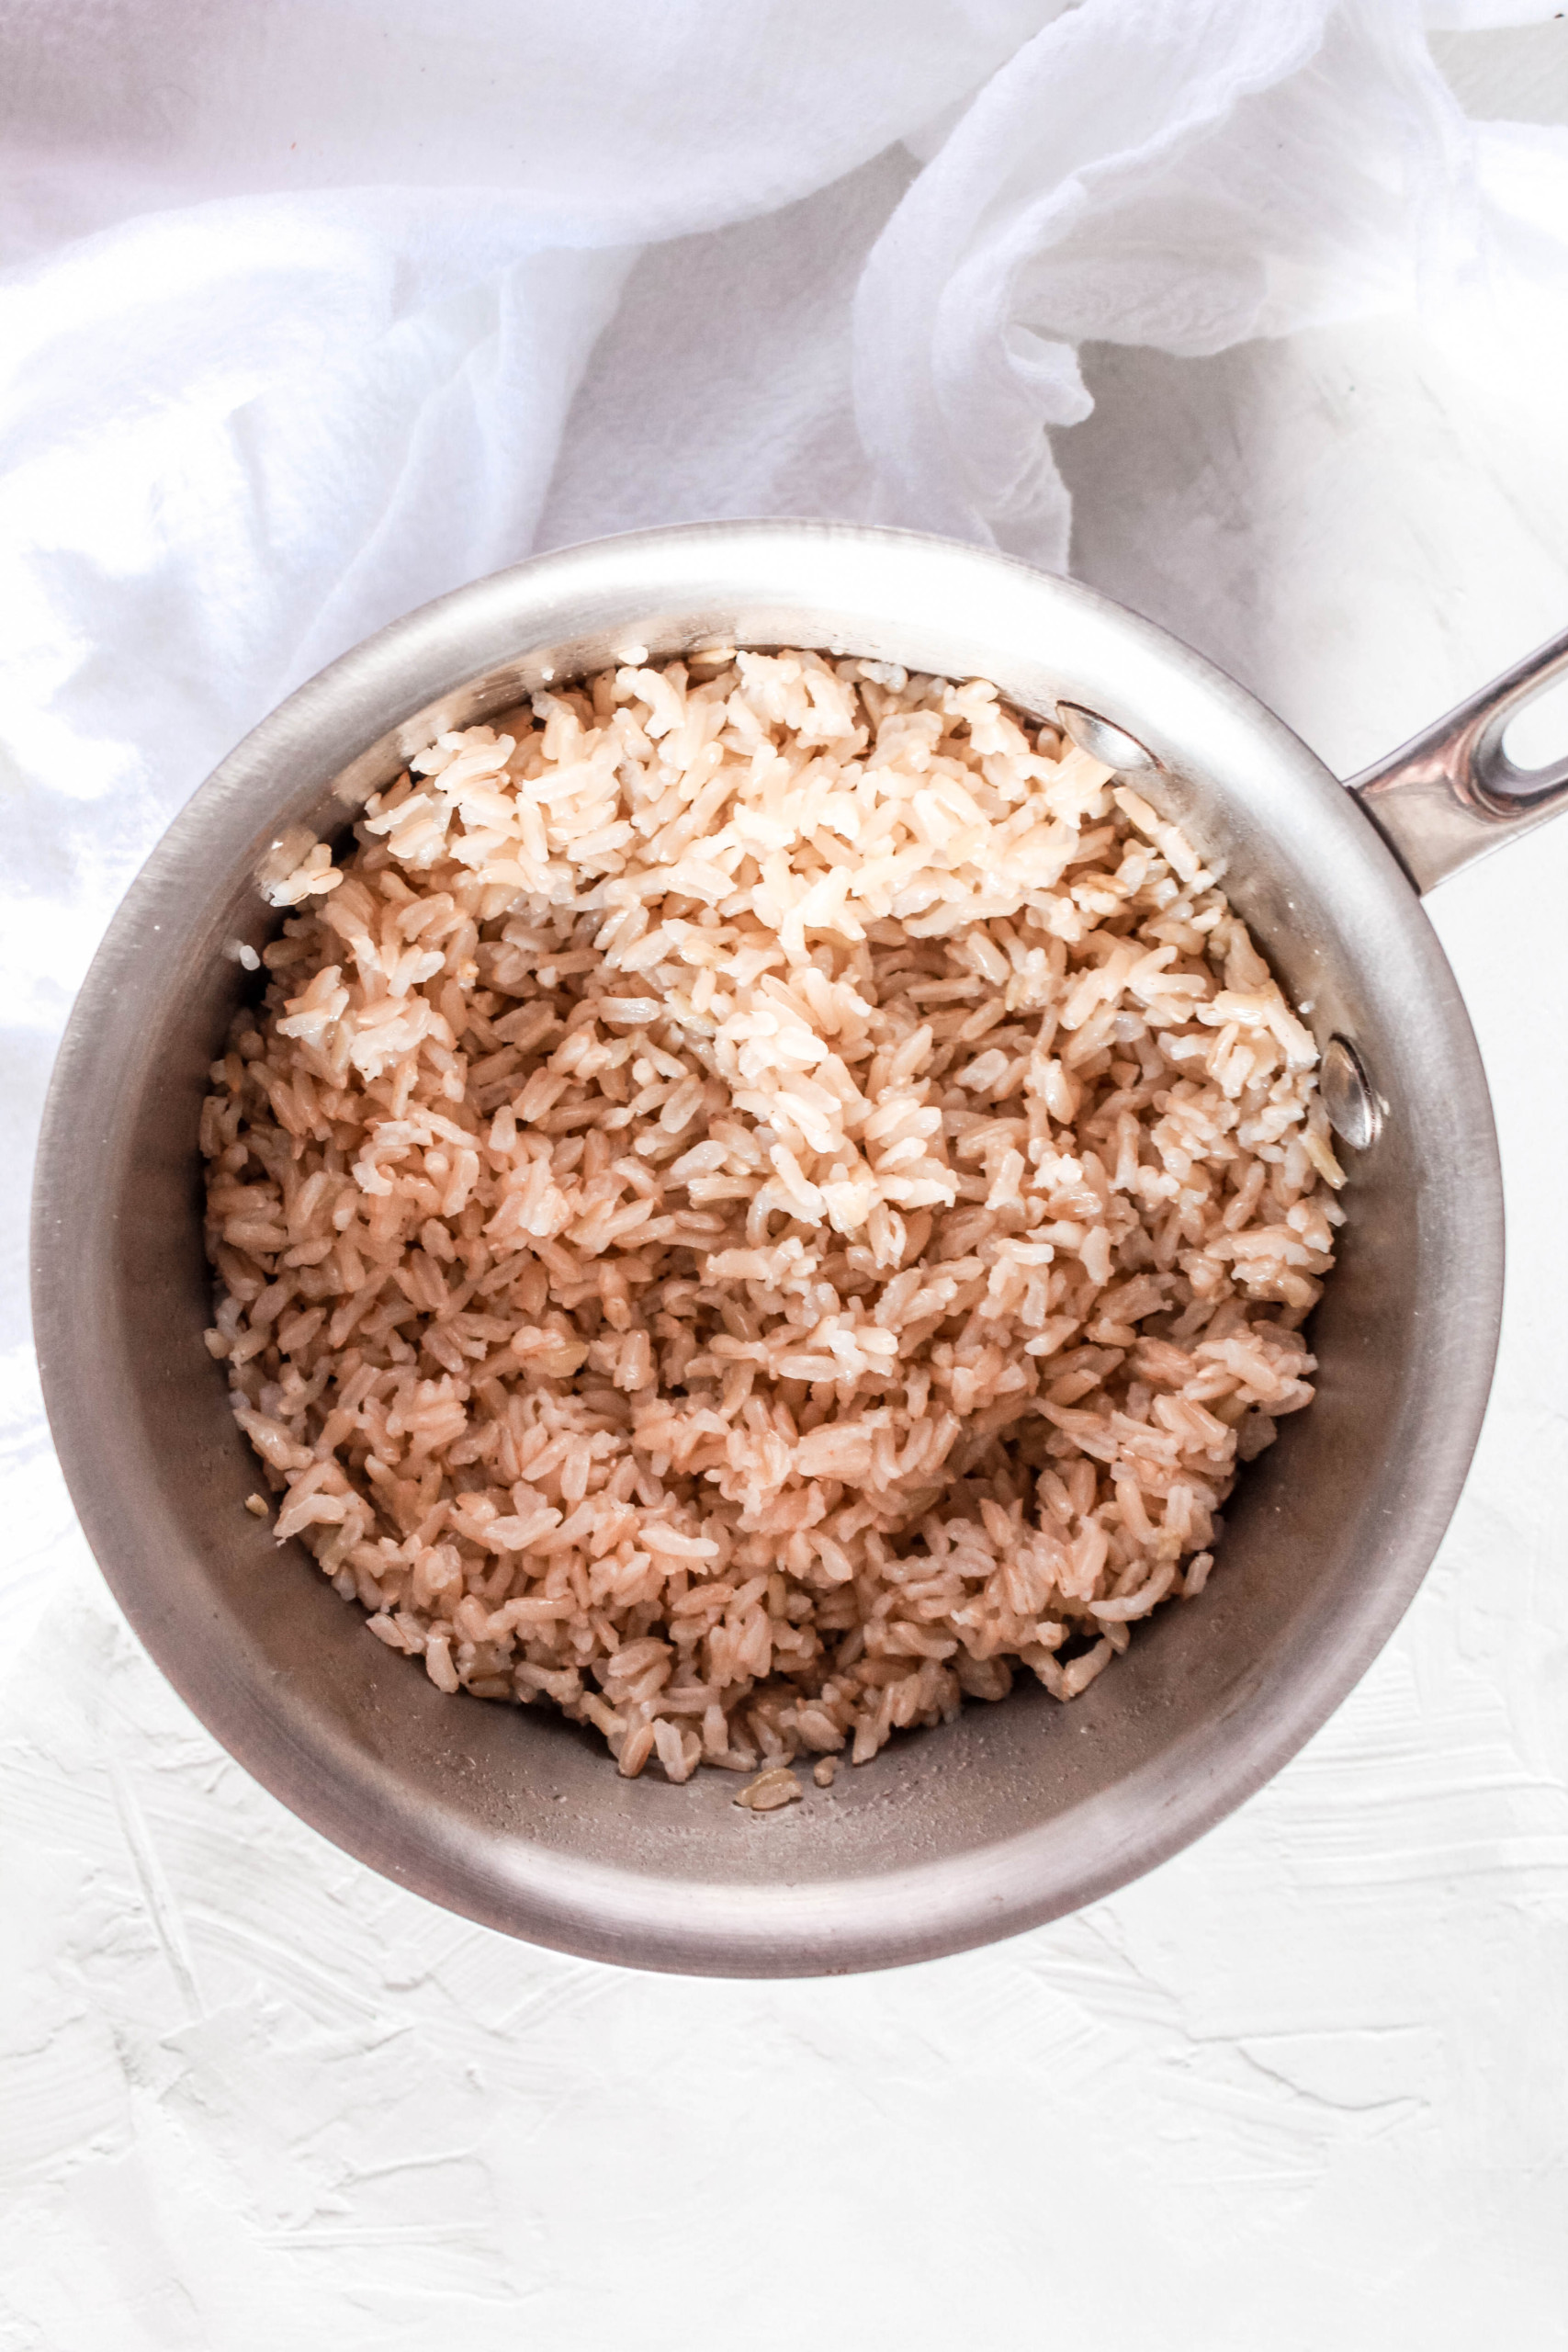 How to Cook Brown Rice –